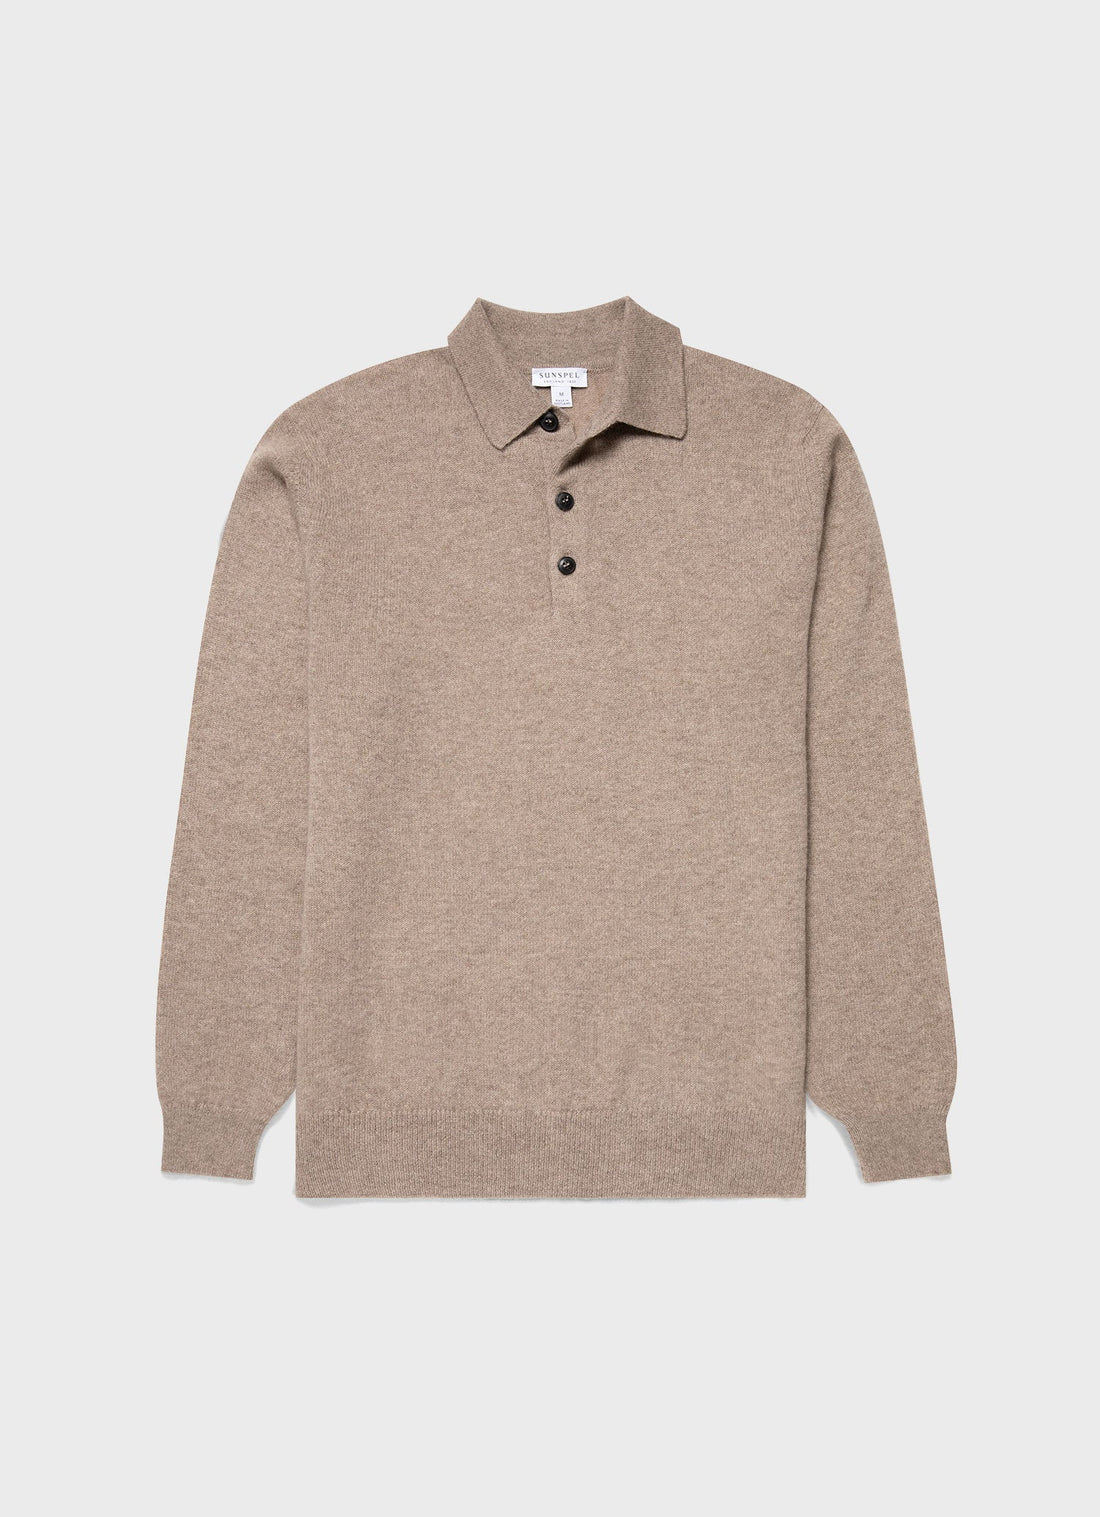 Men's Cashmere Polo Shirt in Natural Brown